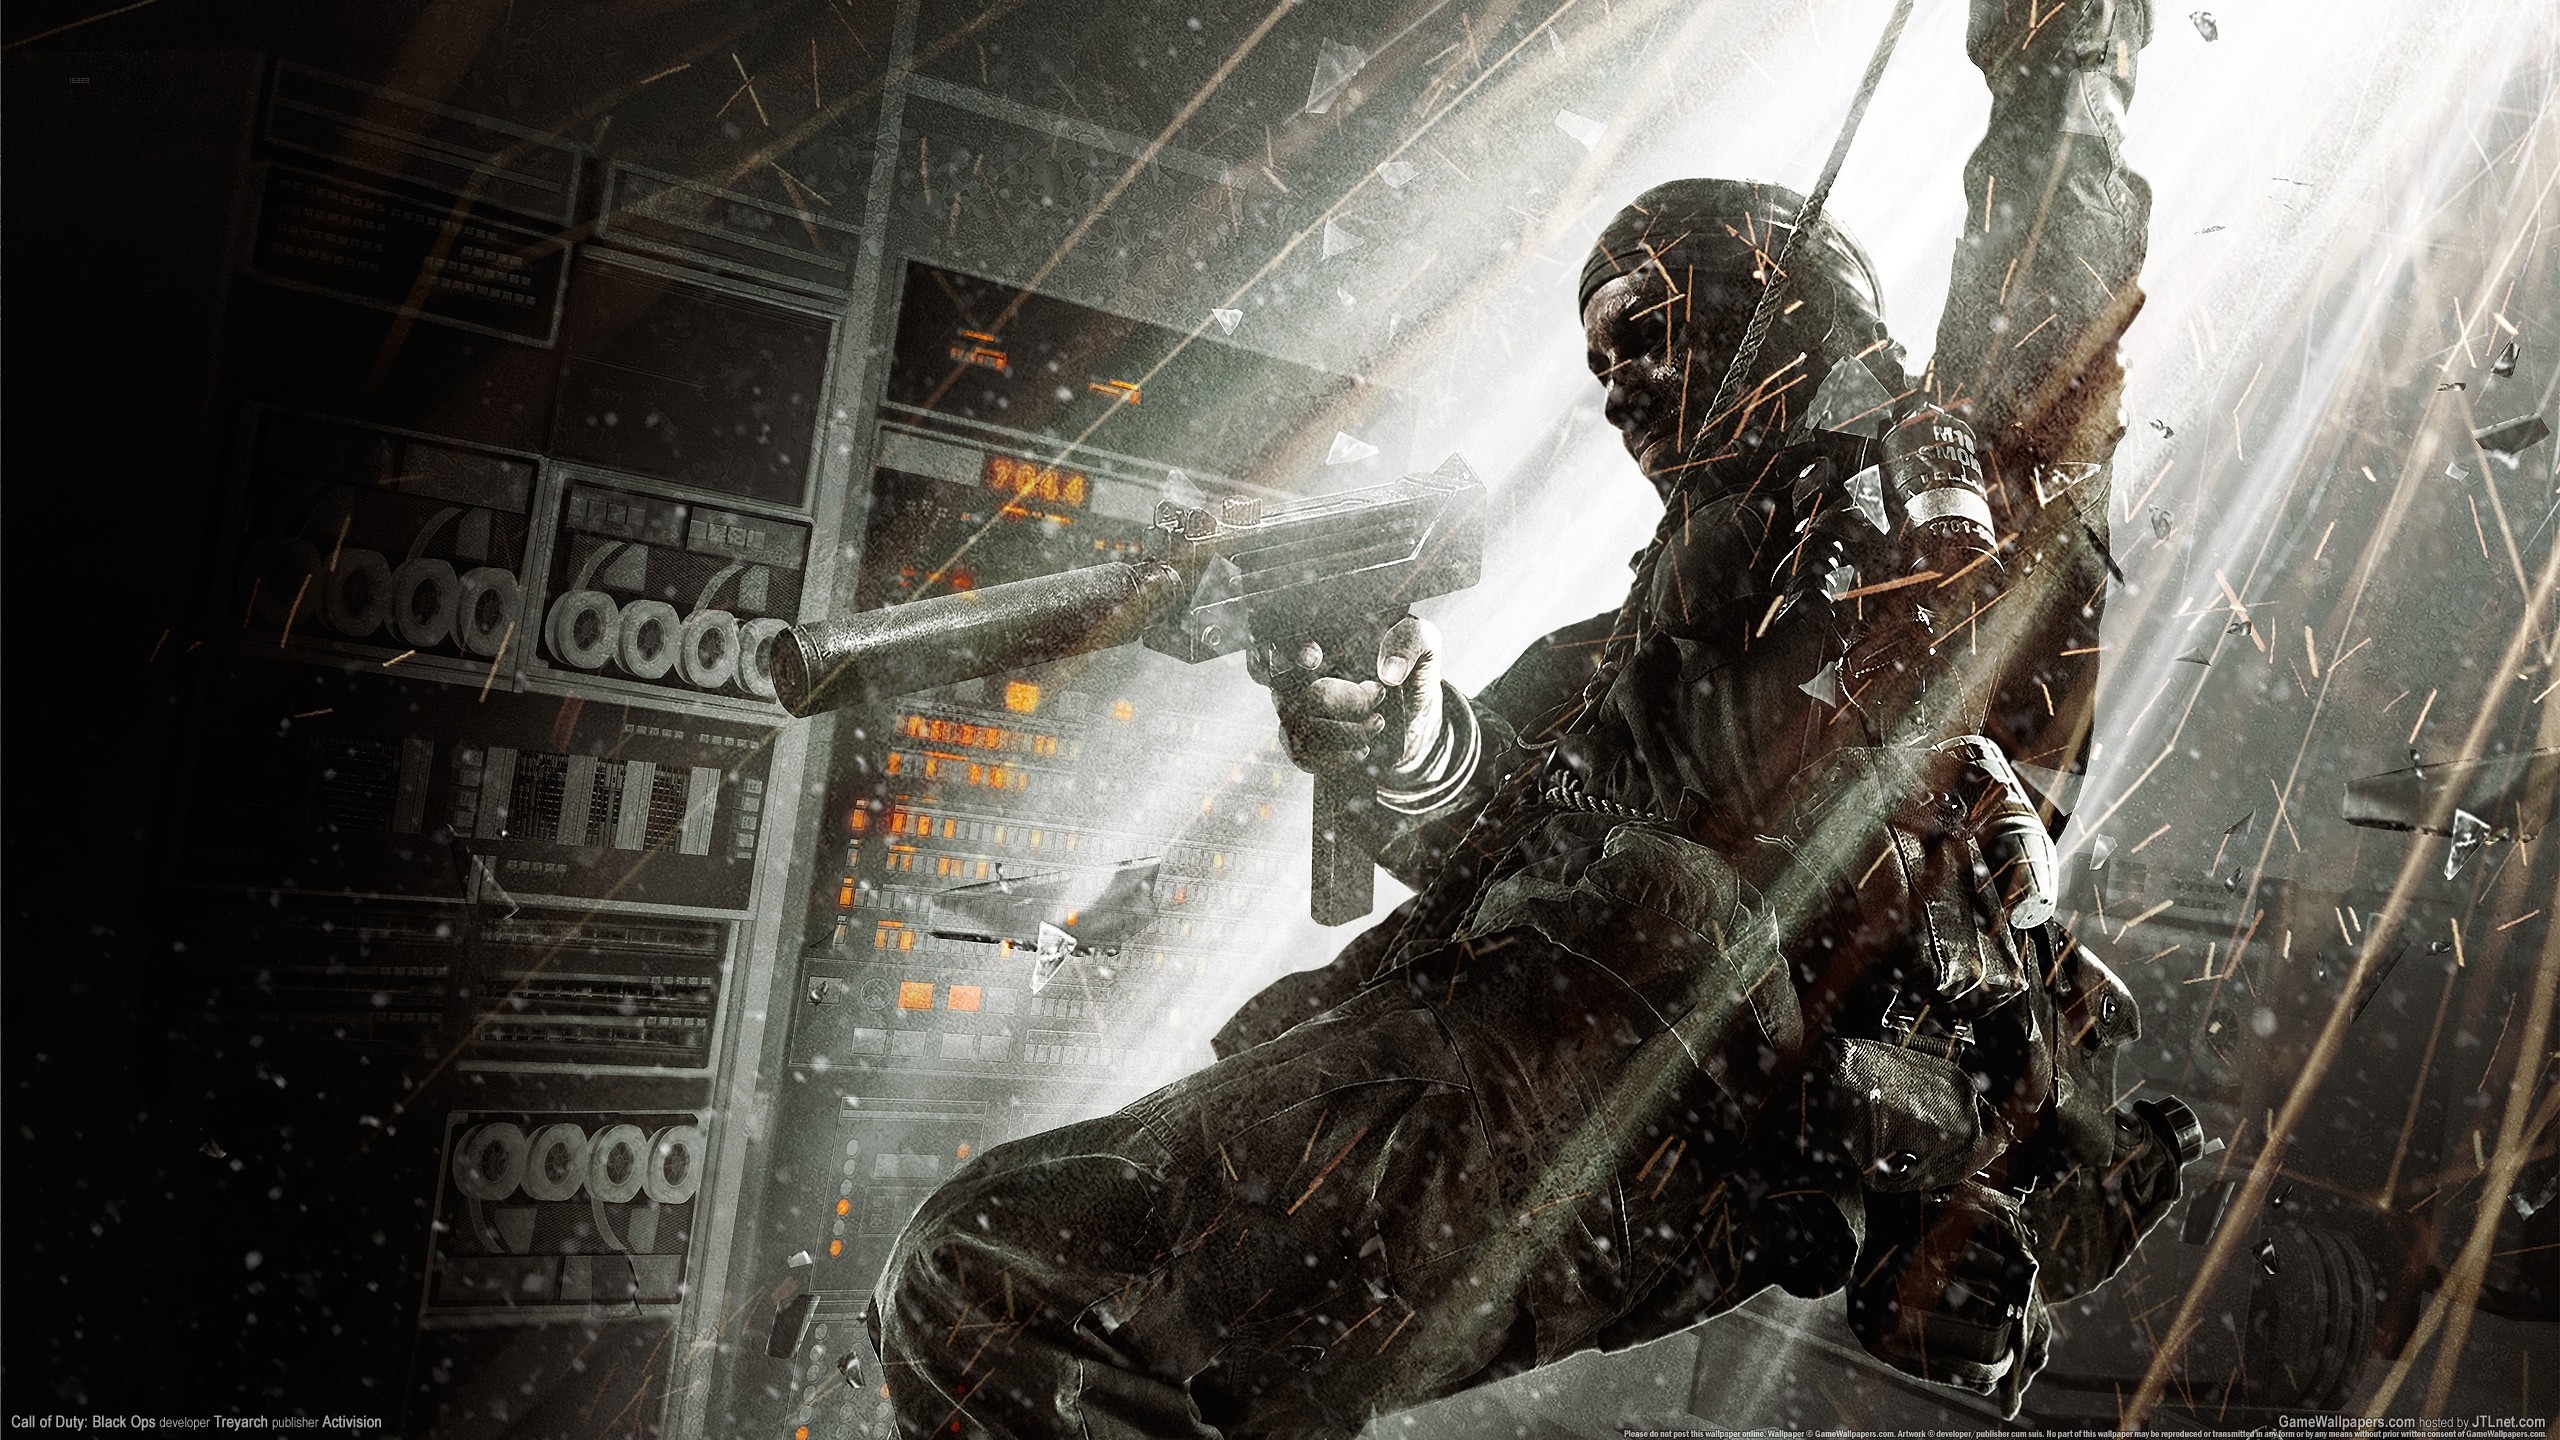 2560x1440 Video Game - Call Of Duty: Black Ops Call Of Duty Video Game Wallpaper